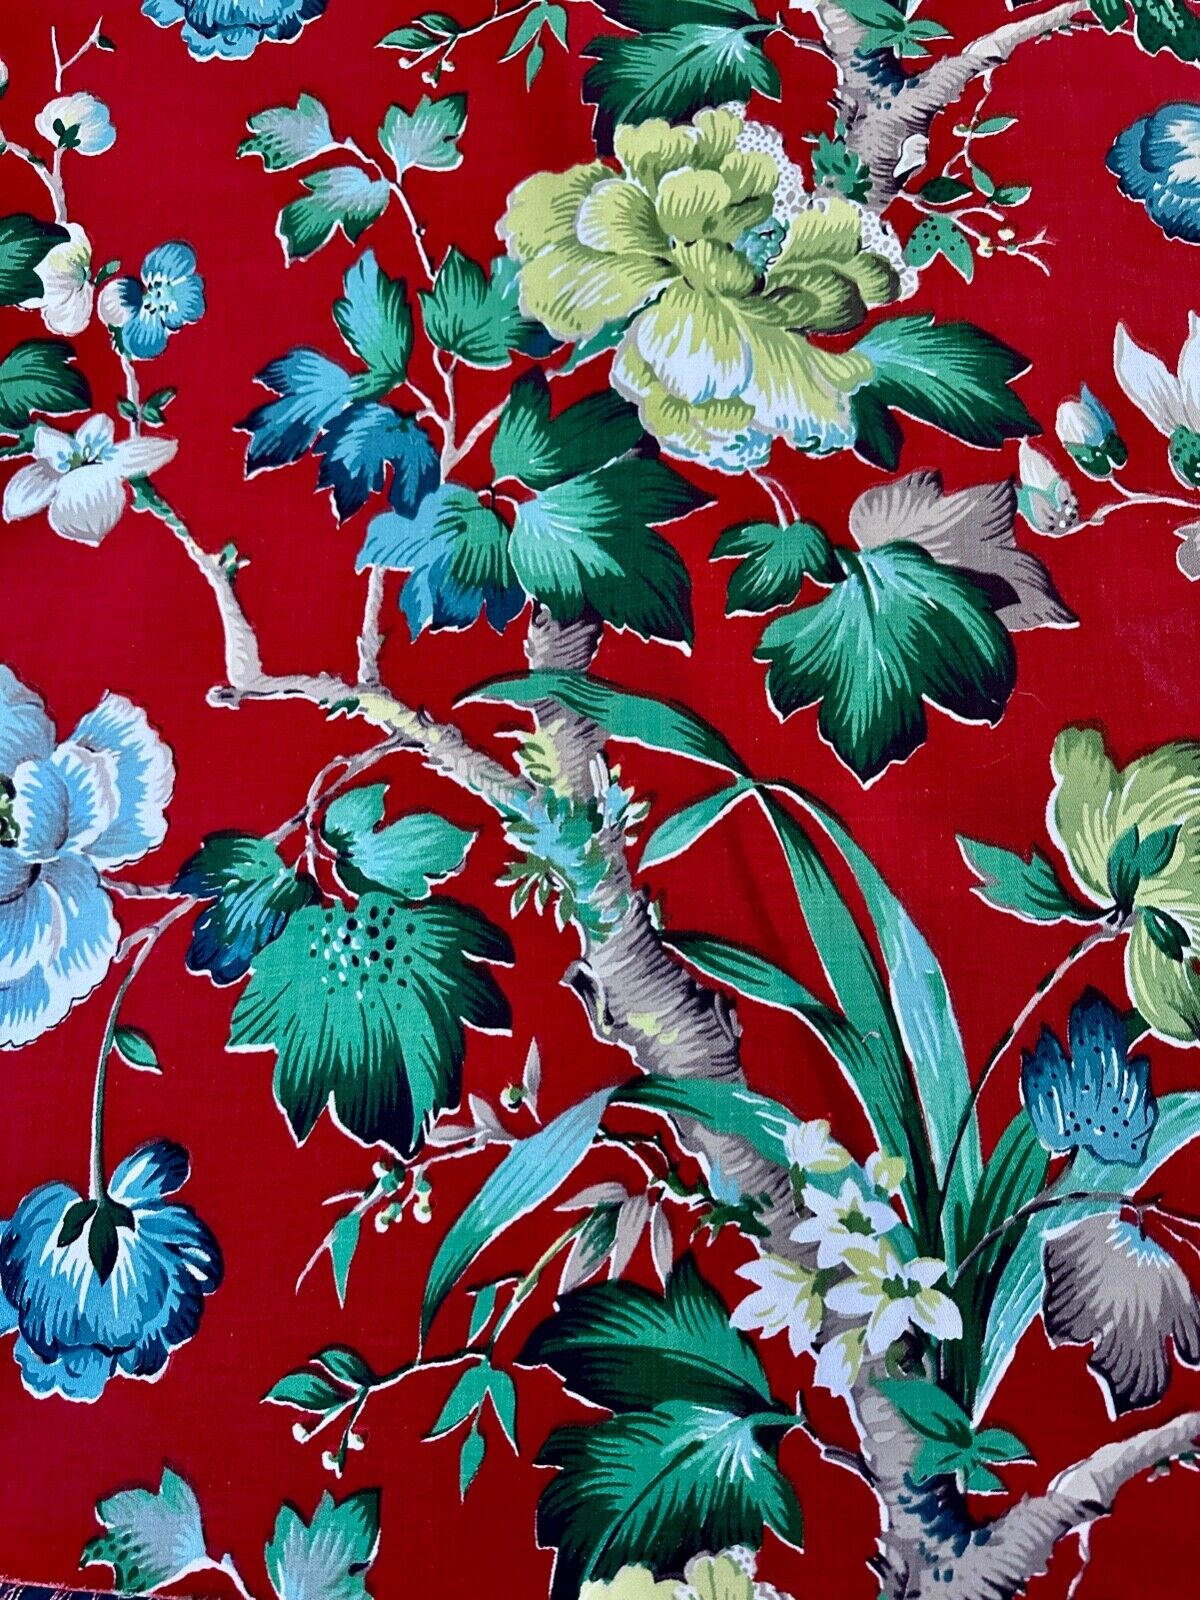 Oriental Garden on Imperial RED 1940\'s Barkcloth Era Vintage Fabric 16YDS Avail